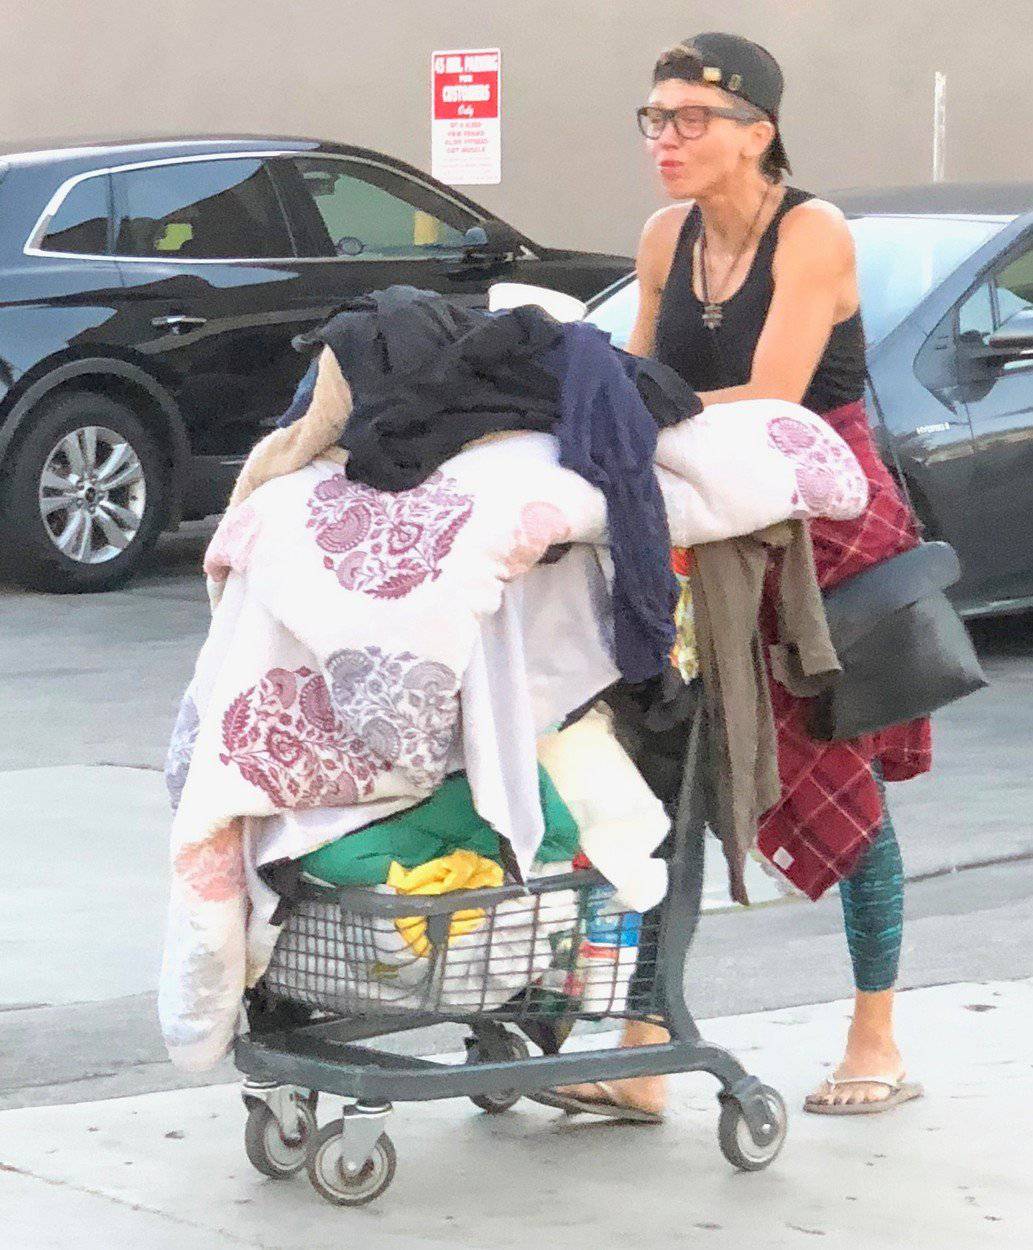 EXCLUSIVE: Baywatch star Jeremy Jackson ex wife Loni Willison seen rummaging through trash cans